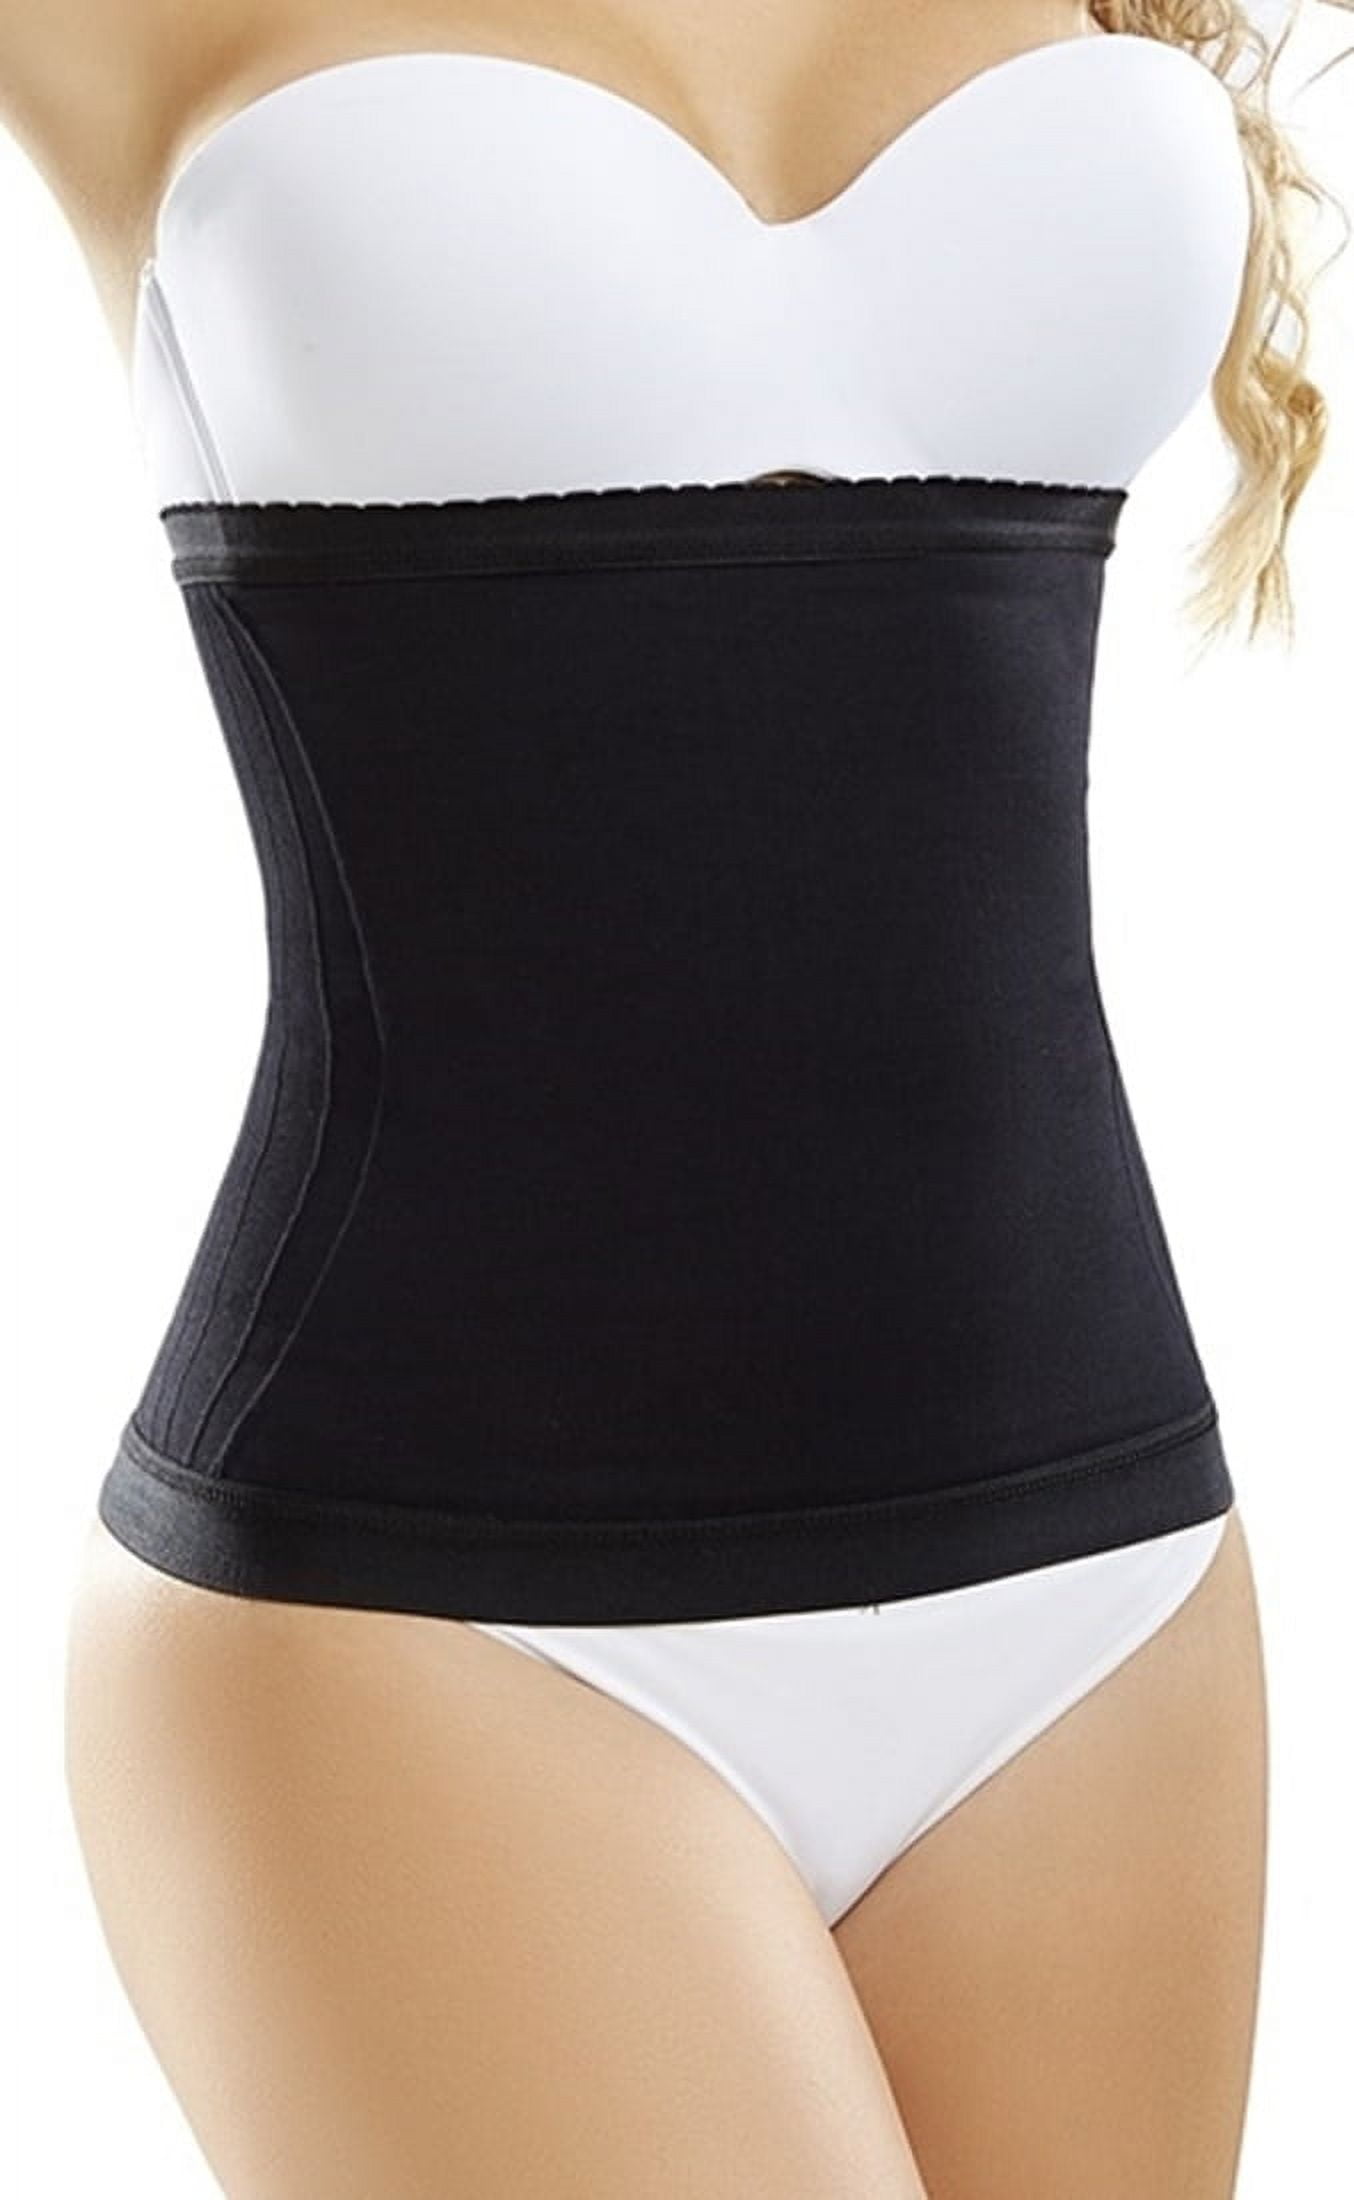 Girdle Shapewear Bodysuit-Faja Colombiana Fresh and Light Fajas Colombianas  Reductoras y Moldeadoras Girdle for women Semaless No zippers, no hooks, no  straps Silicone Band Sculpts your Torso Lower s 